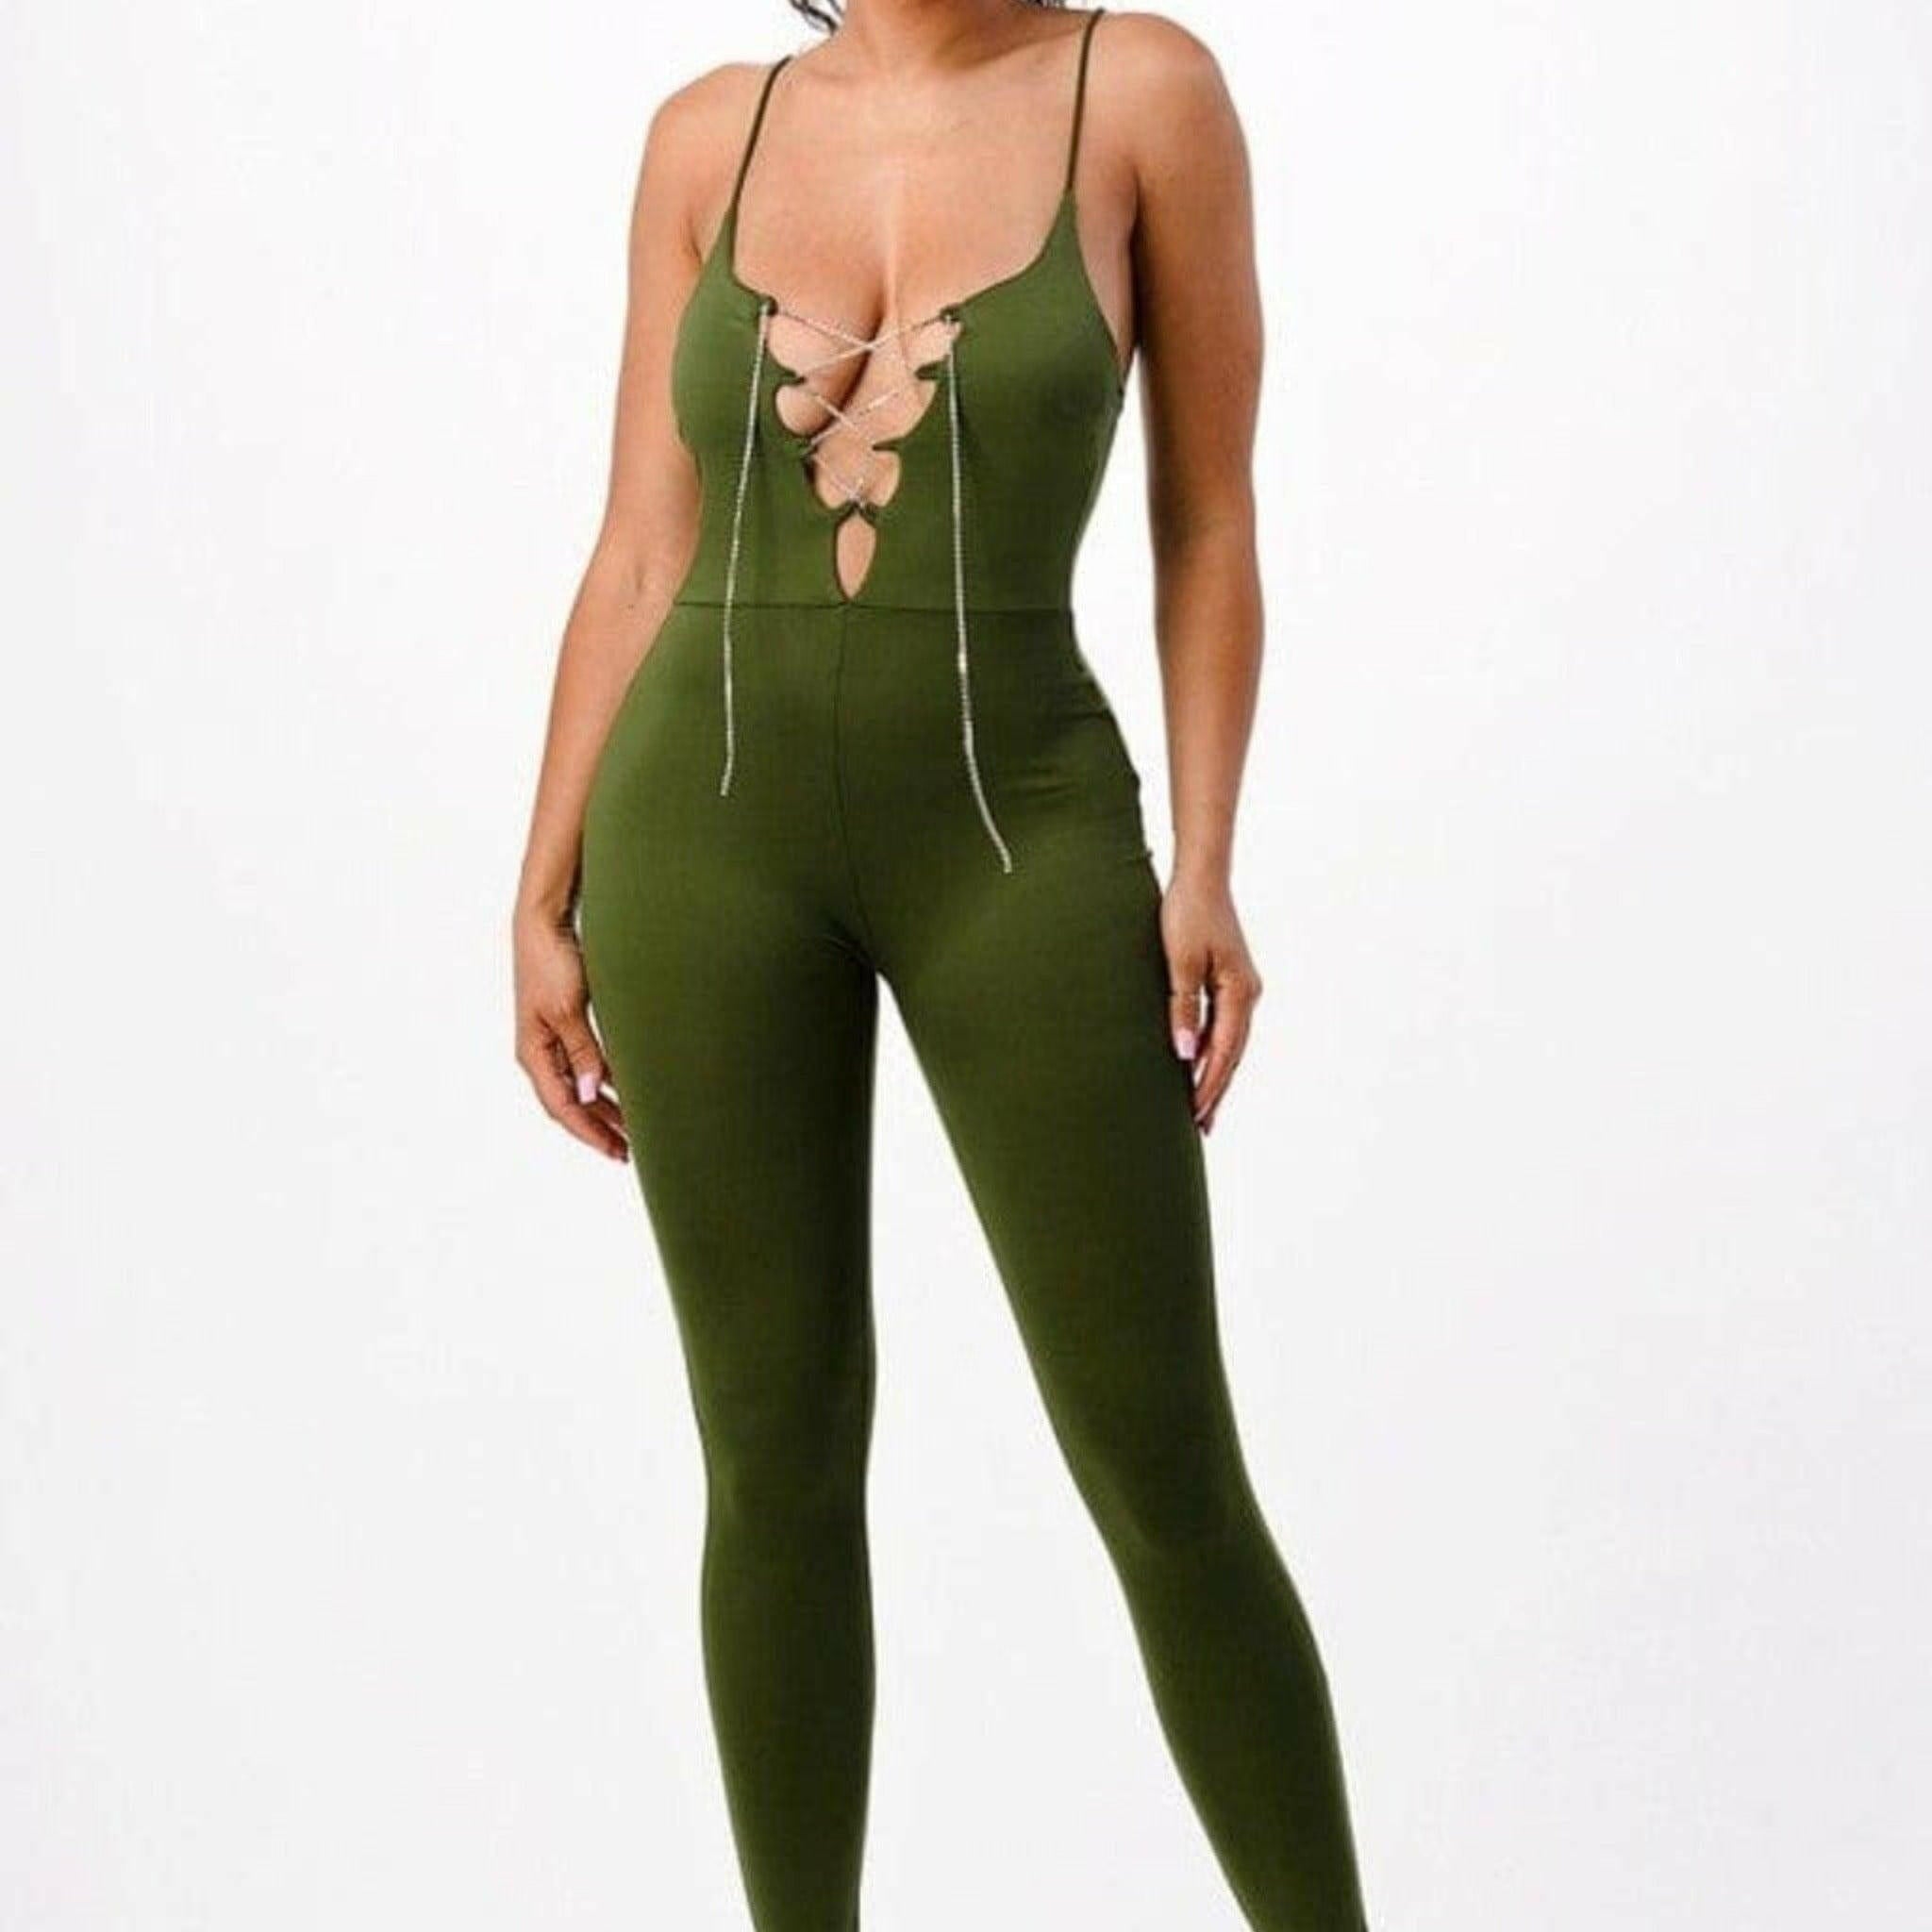 Epicplacess jumpsuits SMALL / GREEN / UNITED STATES Spaghetti Strap V Front Lace Up Jumpsuits 